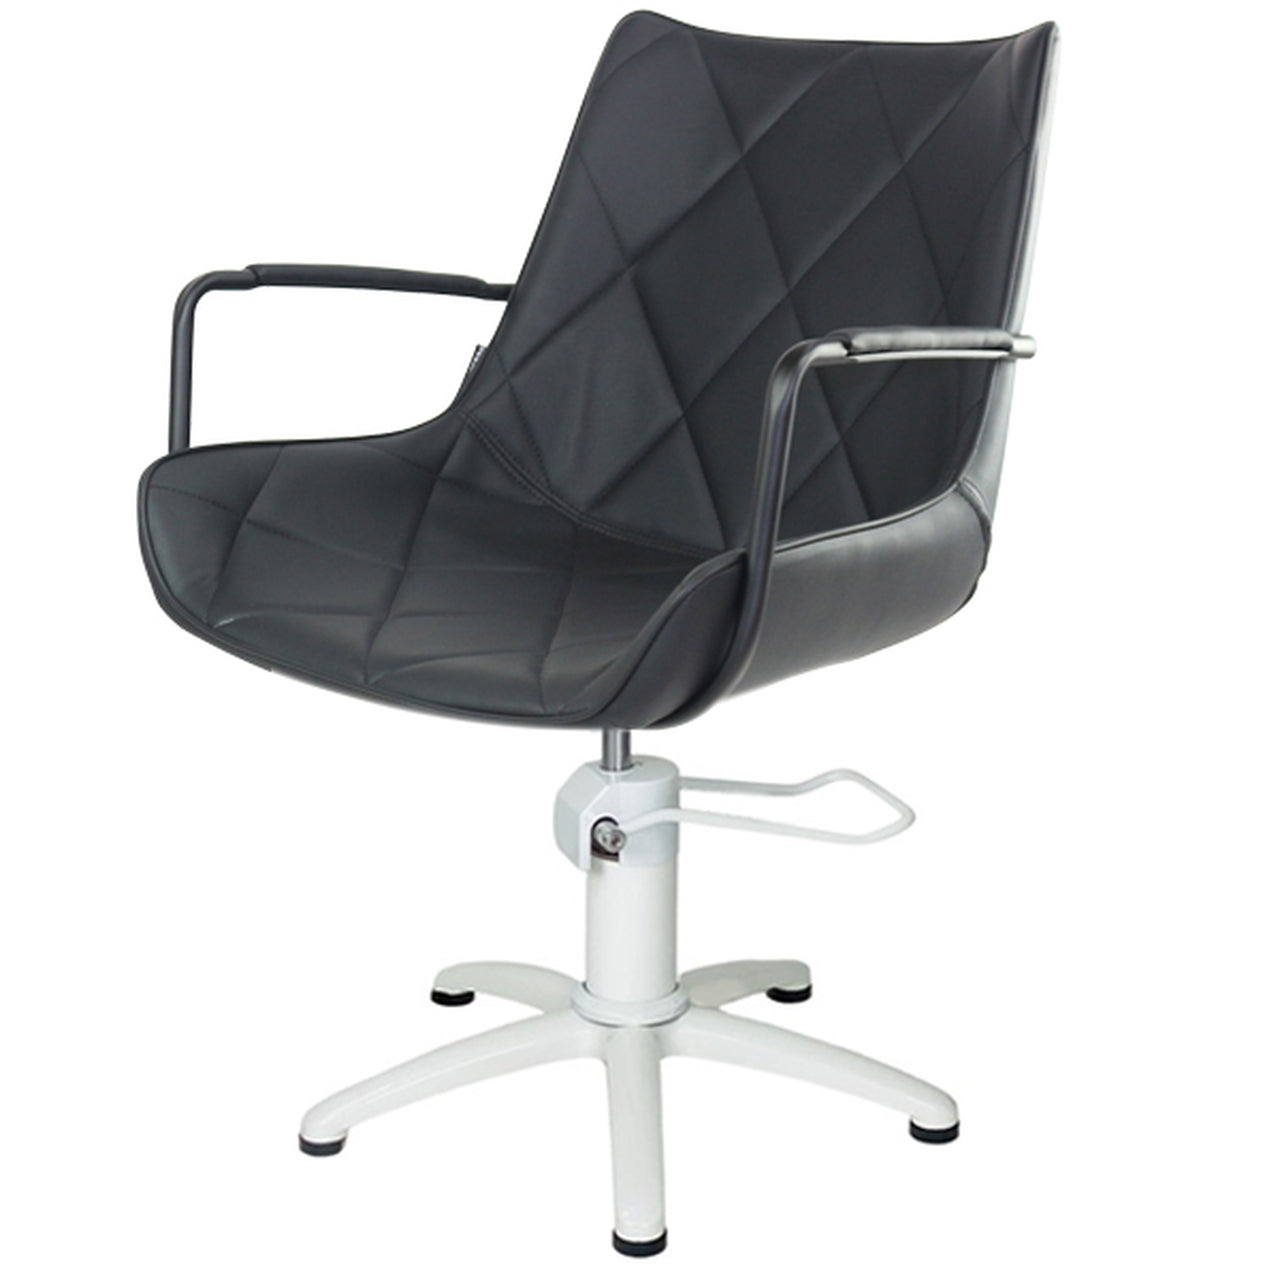 Taylor - WHITE 5 Star Hydraulic Black Upholstery